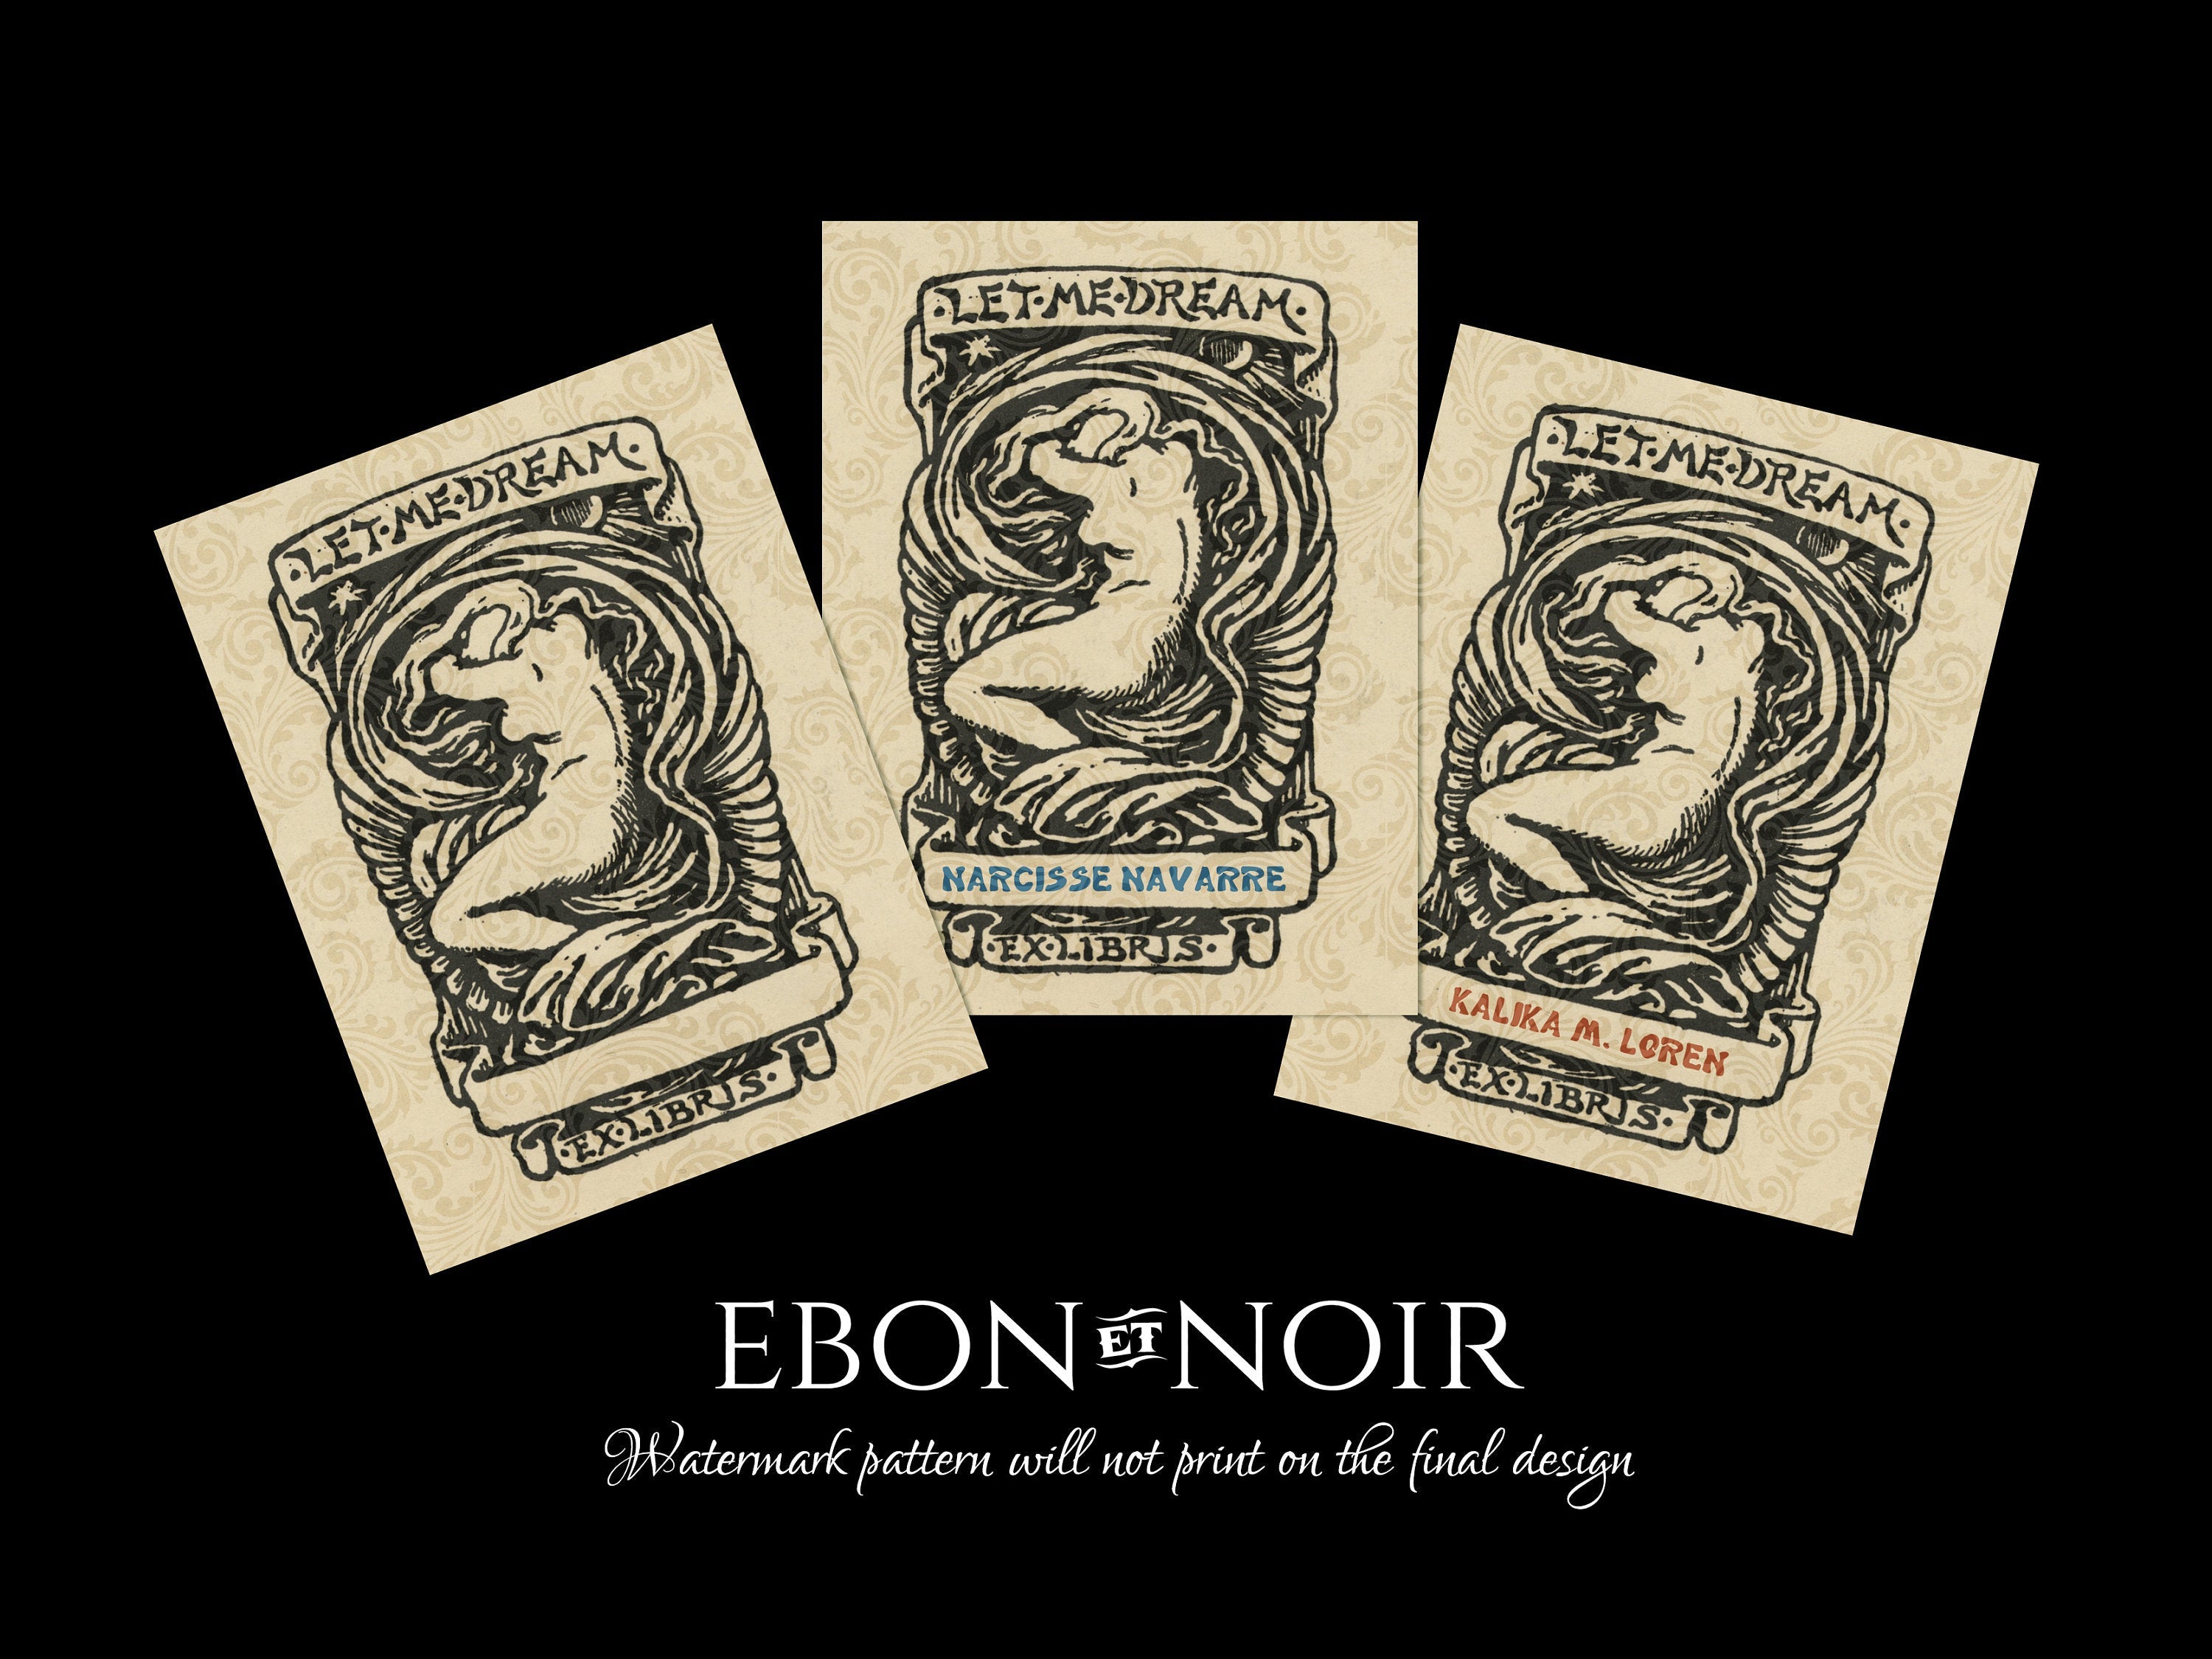 Let Me Dream, Personalized Erotic Ex-Libris Bookplates, Crafted on Traditional Gummed Paper, 3in x 4in, Set of 30